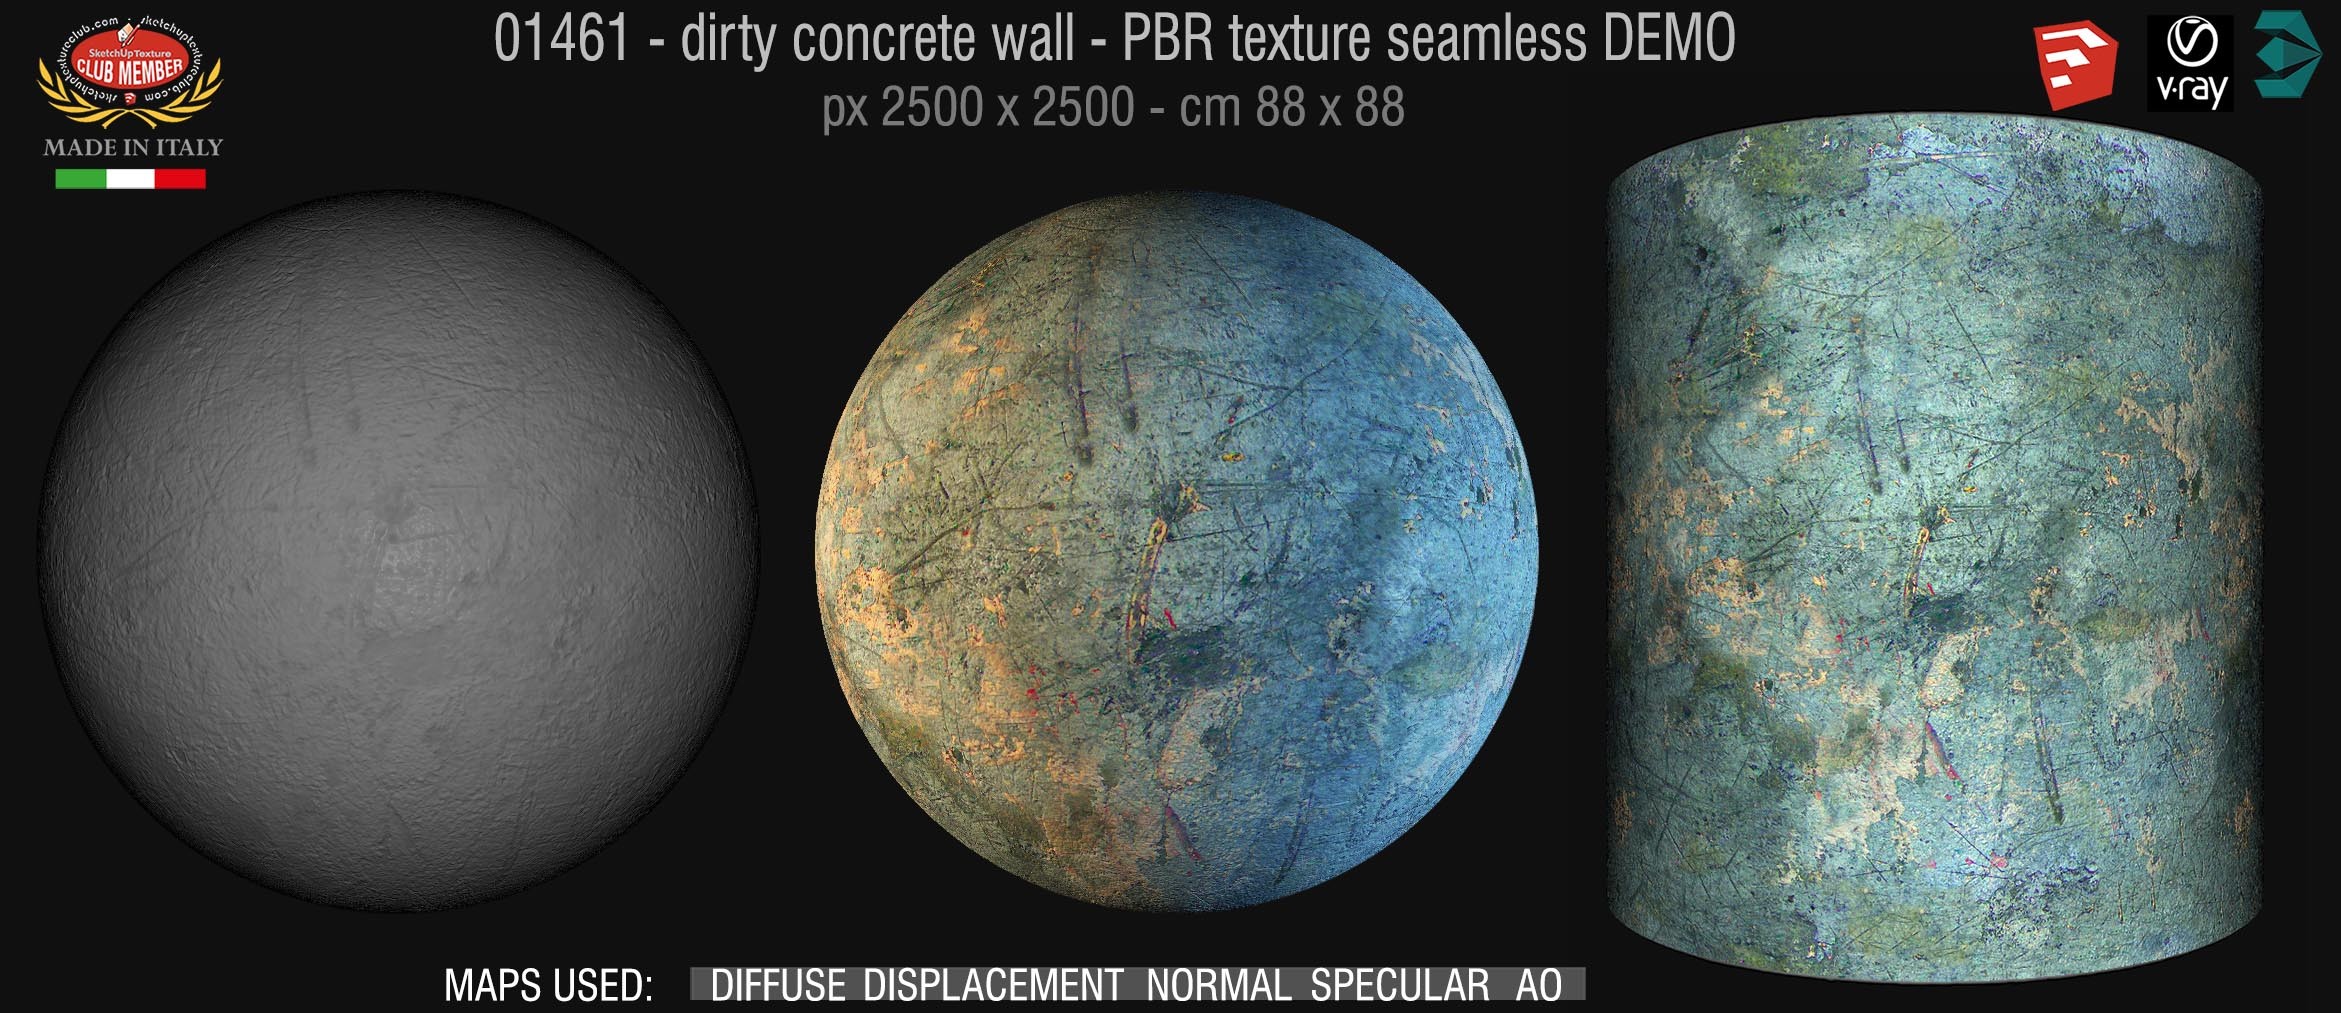 01461 Concrete bare dirty wall PBR texture seamless DEMO